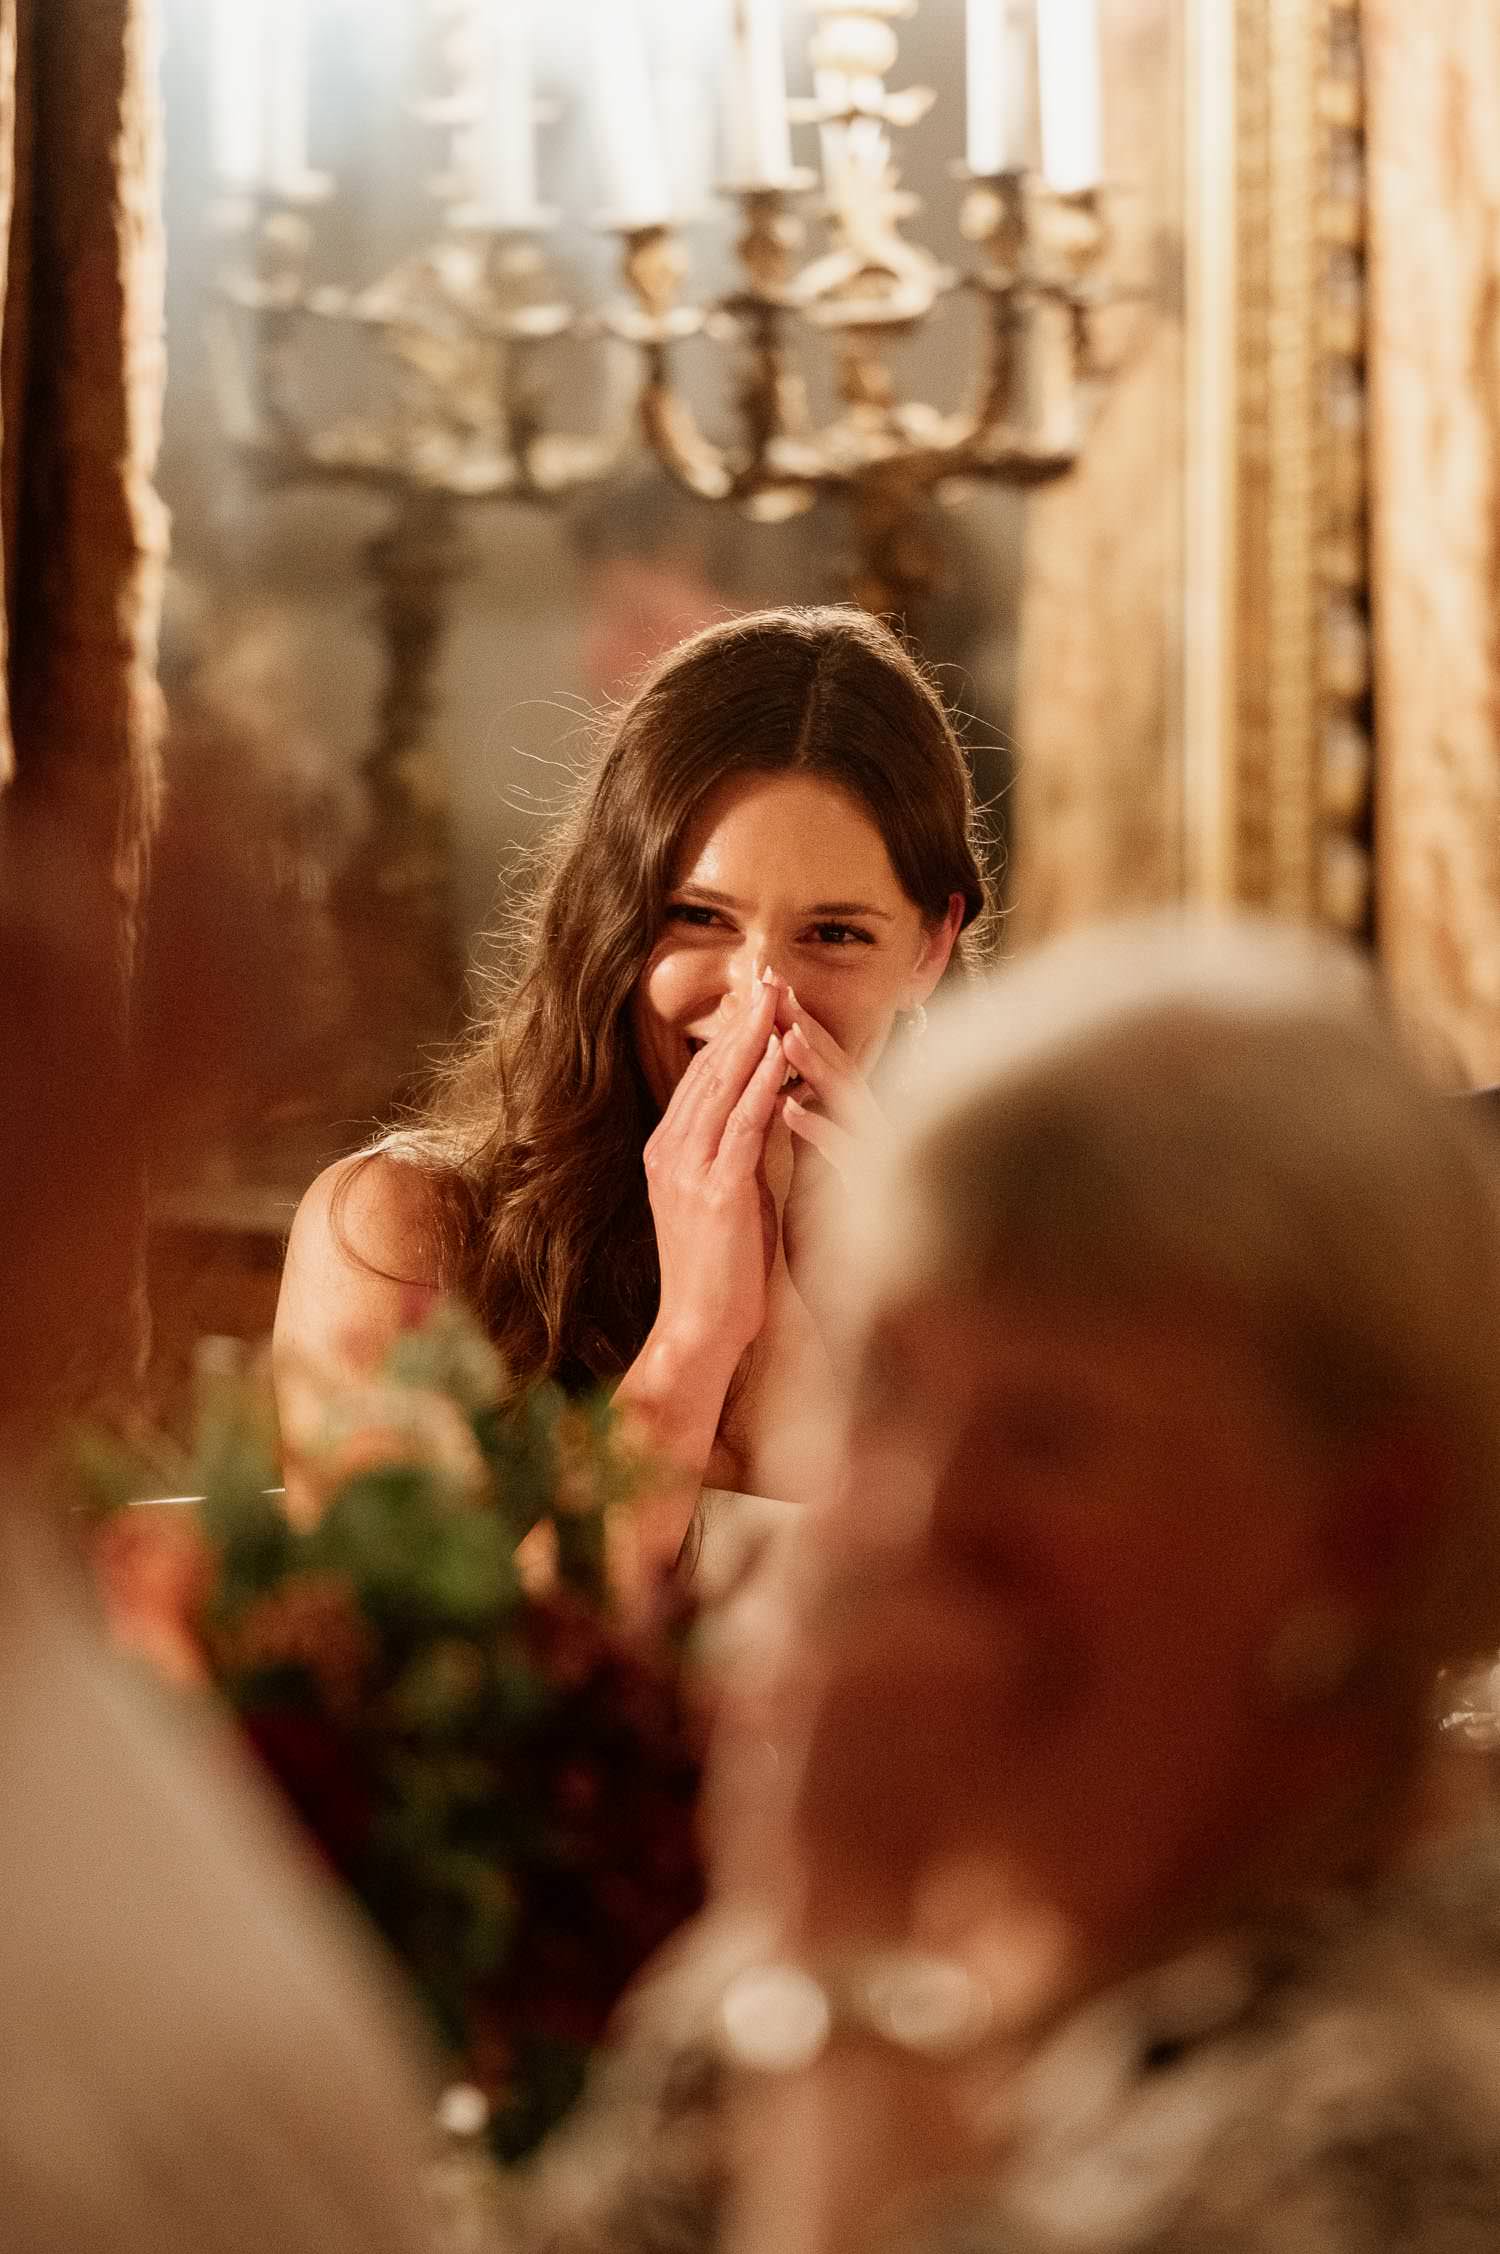 Bride blushing during the groom's speech.